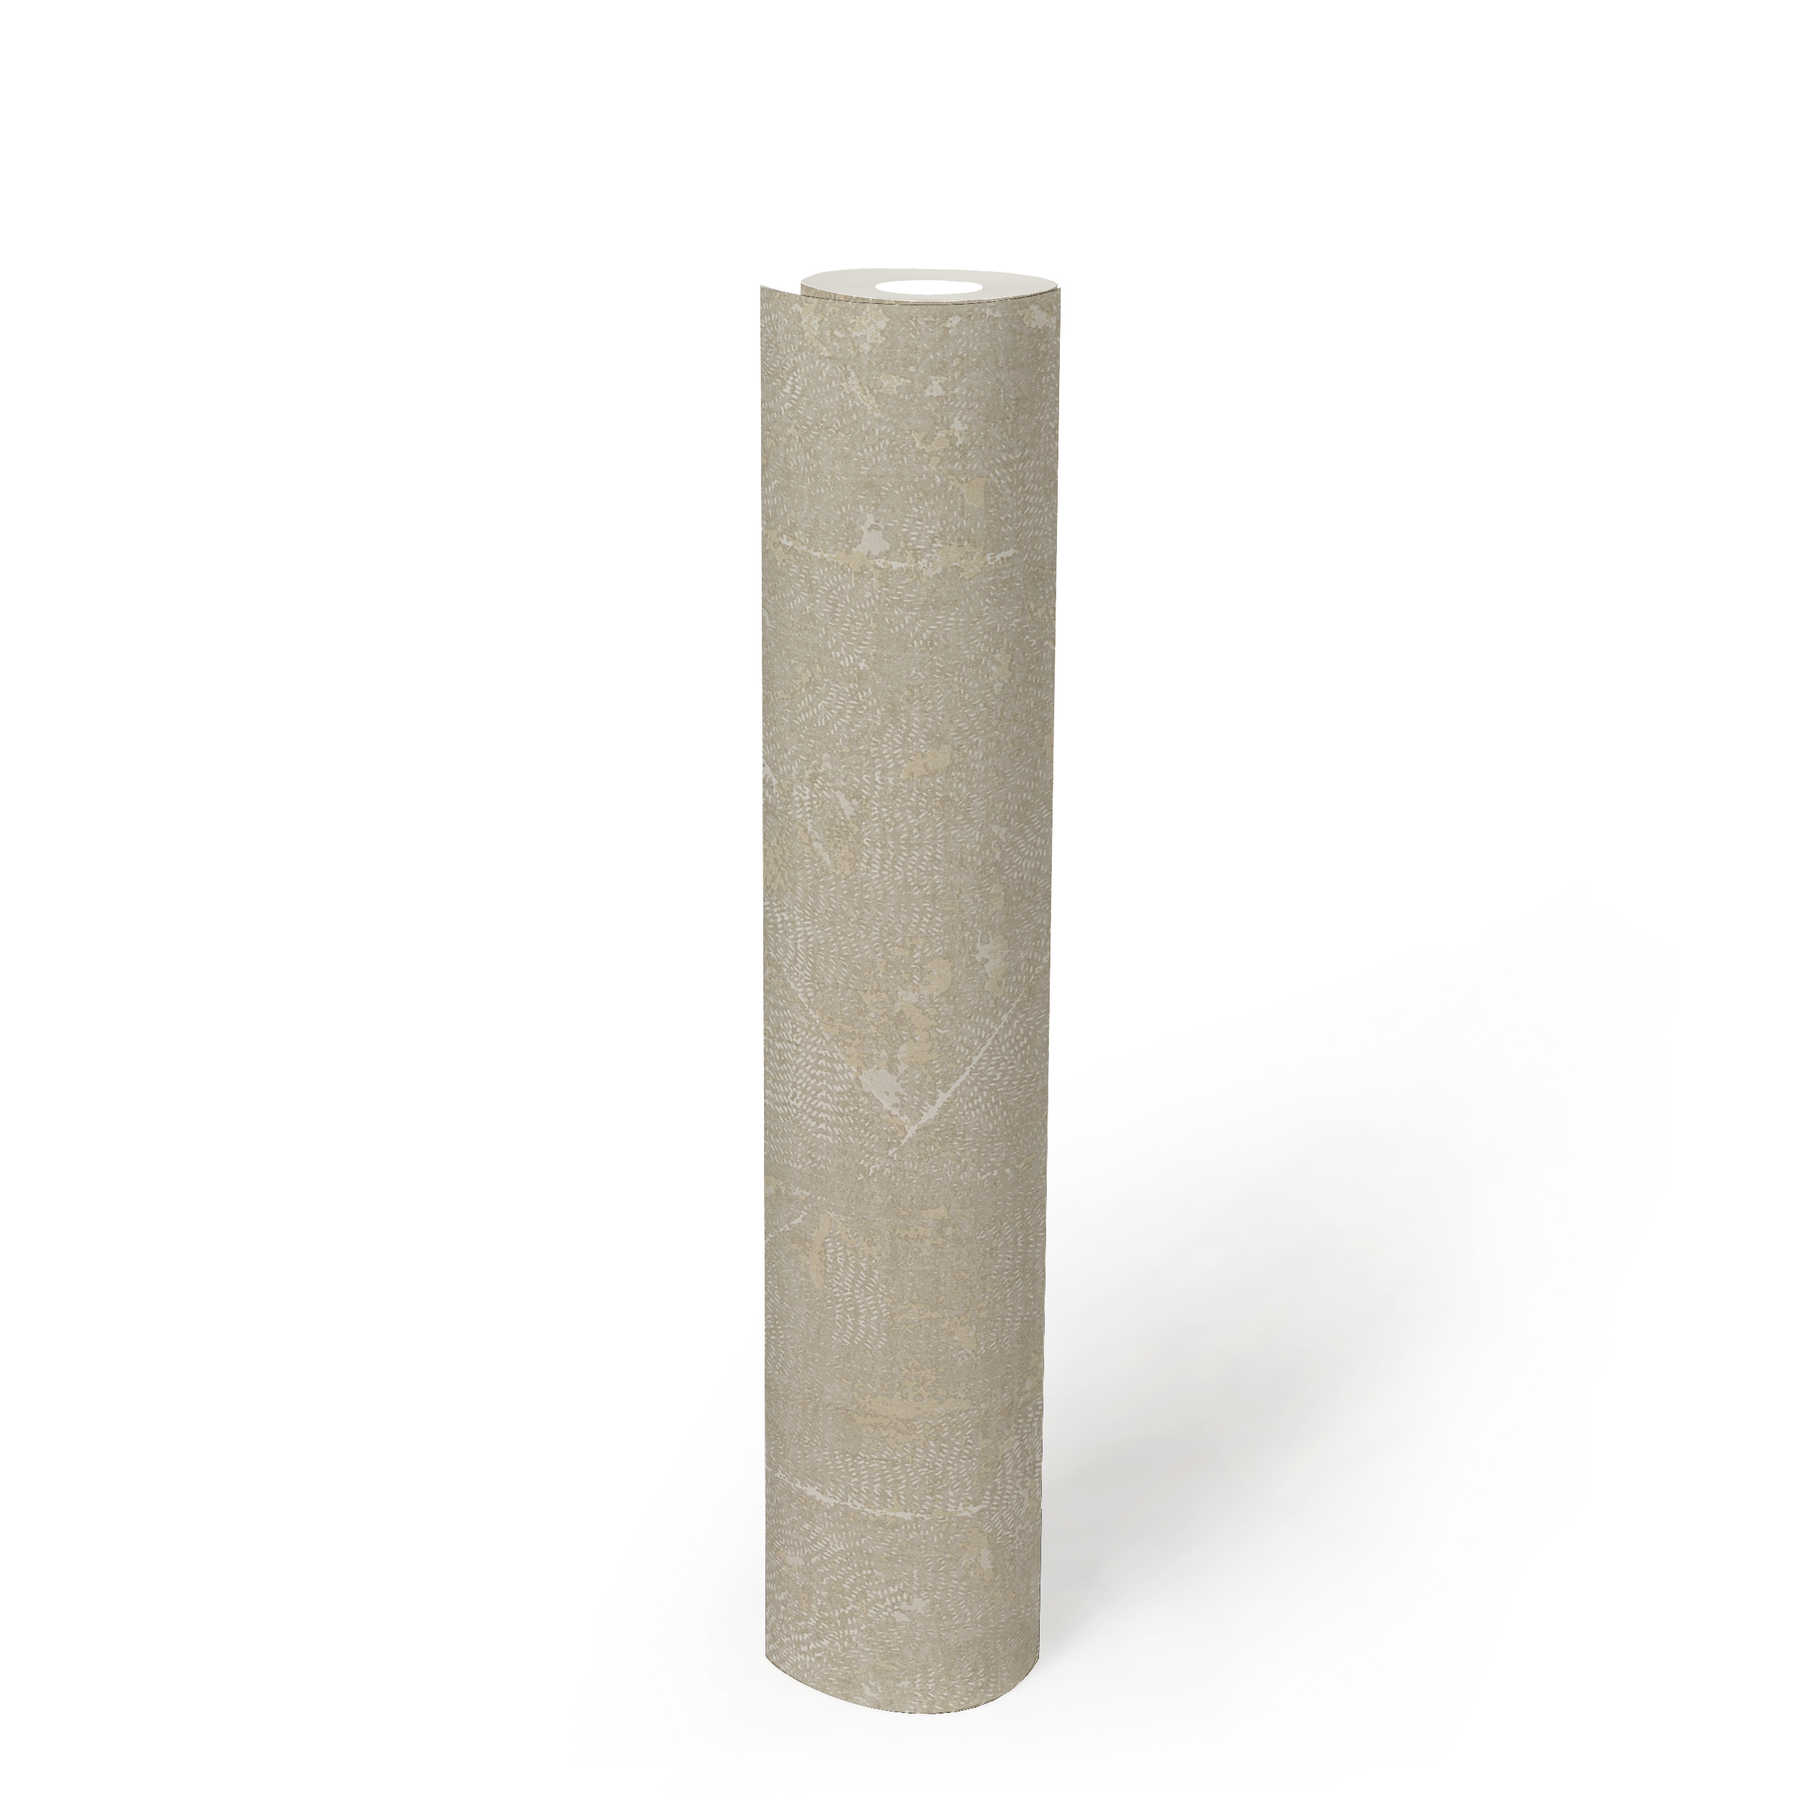             wallpaper beige patterned with silver accents - grey, beige, silver
        